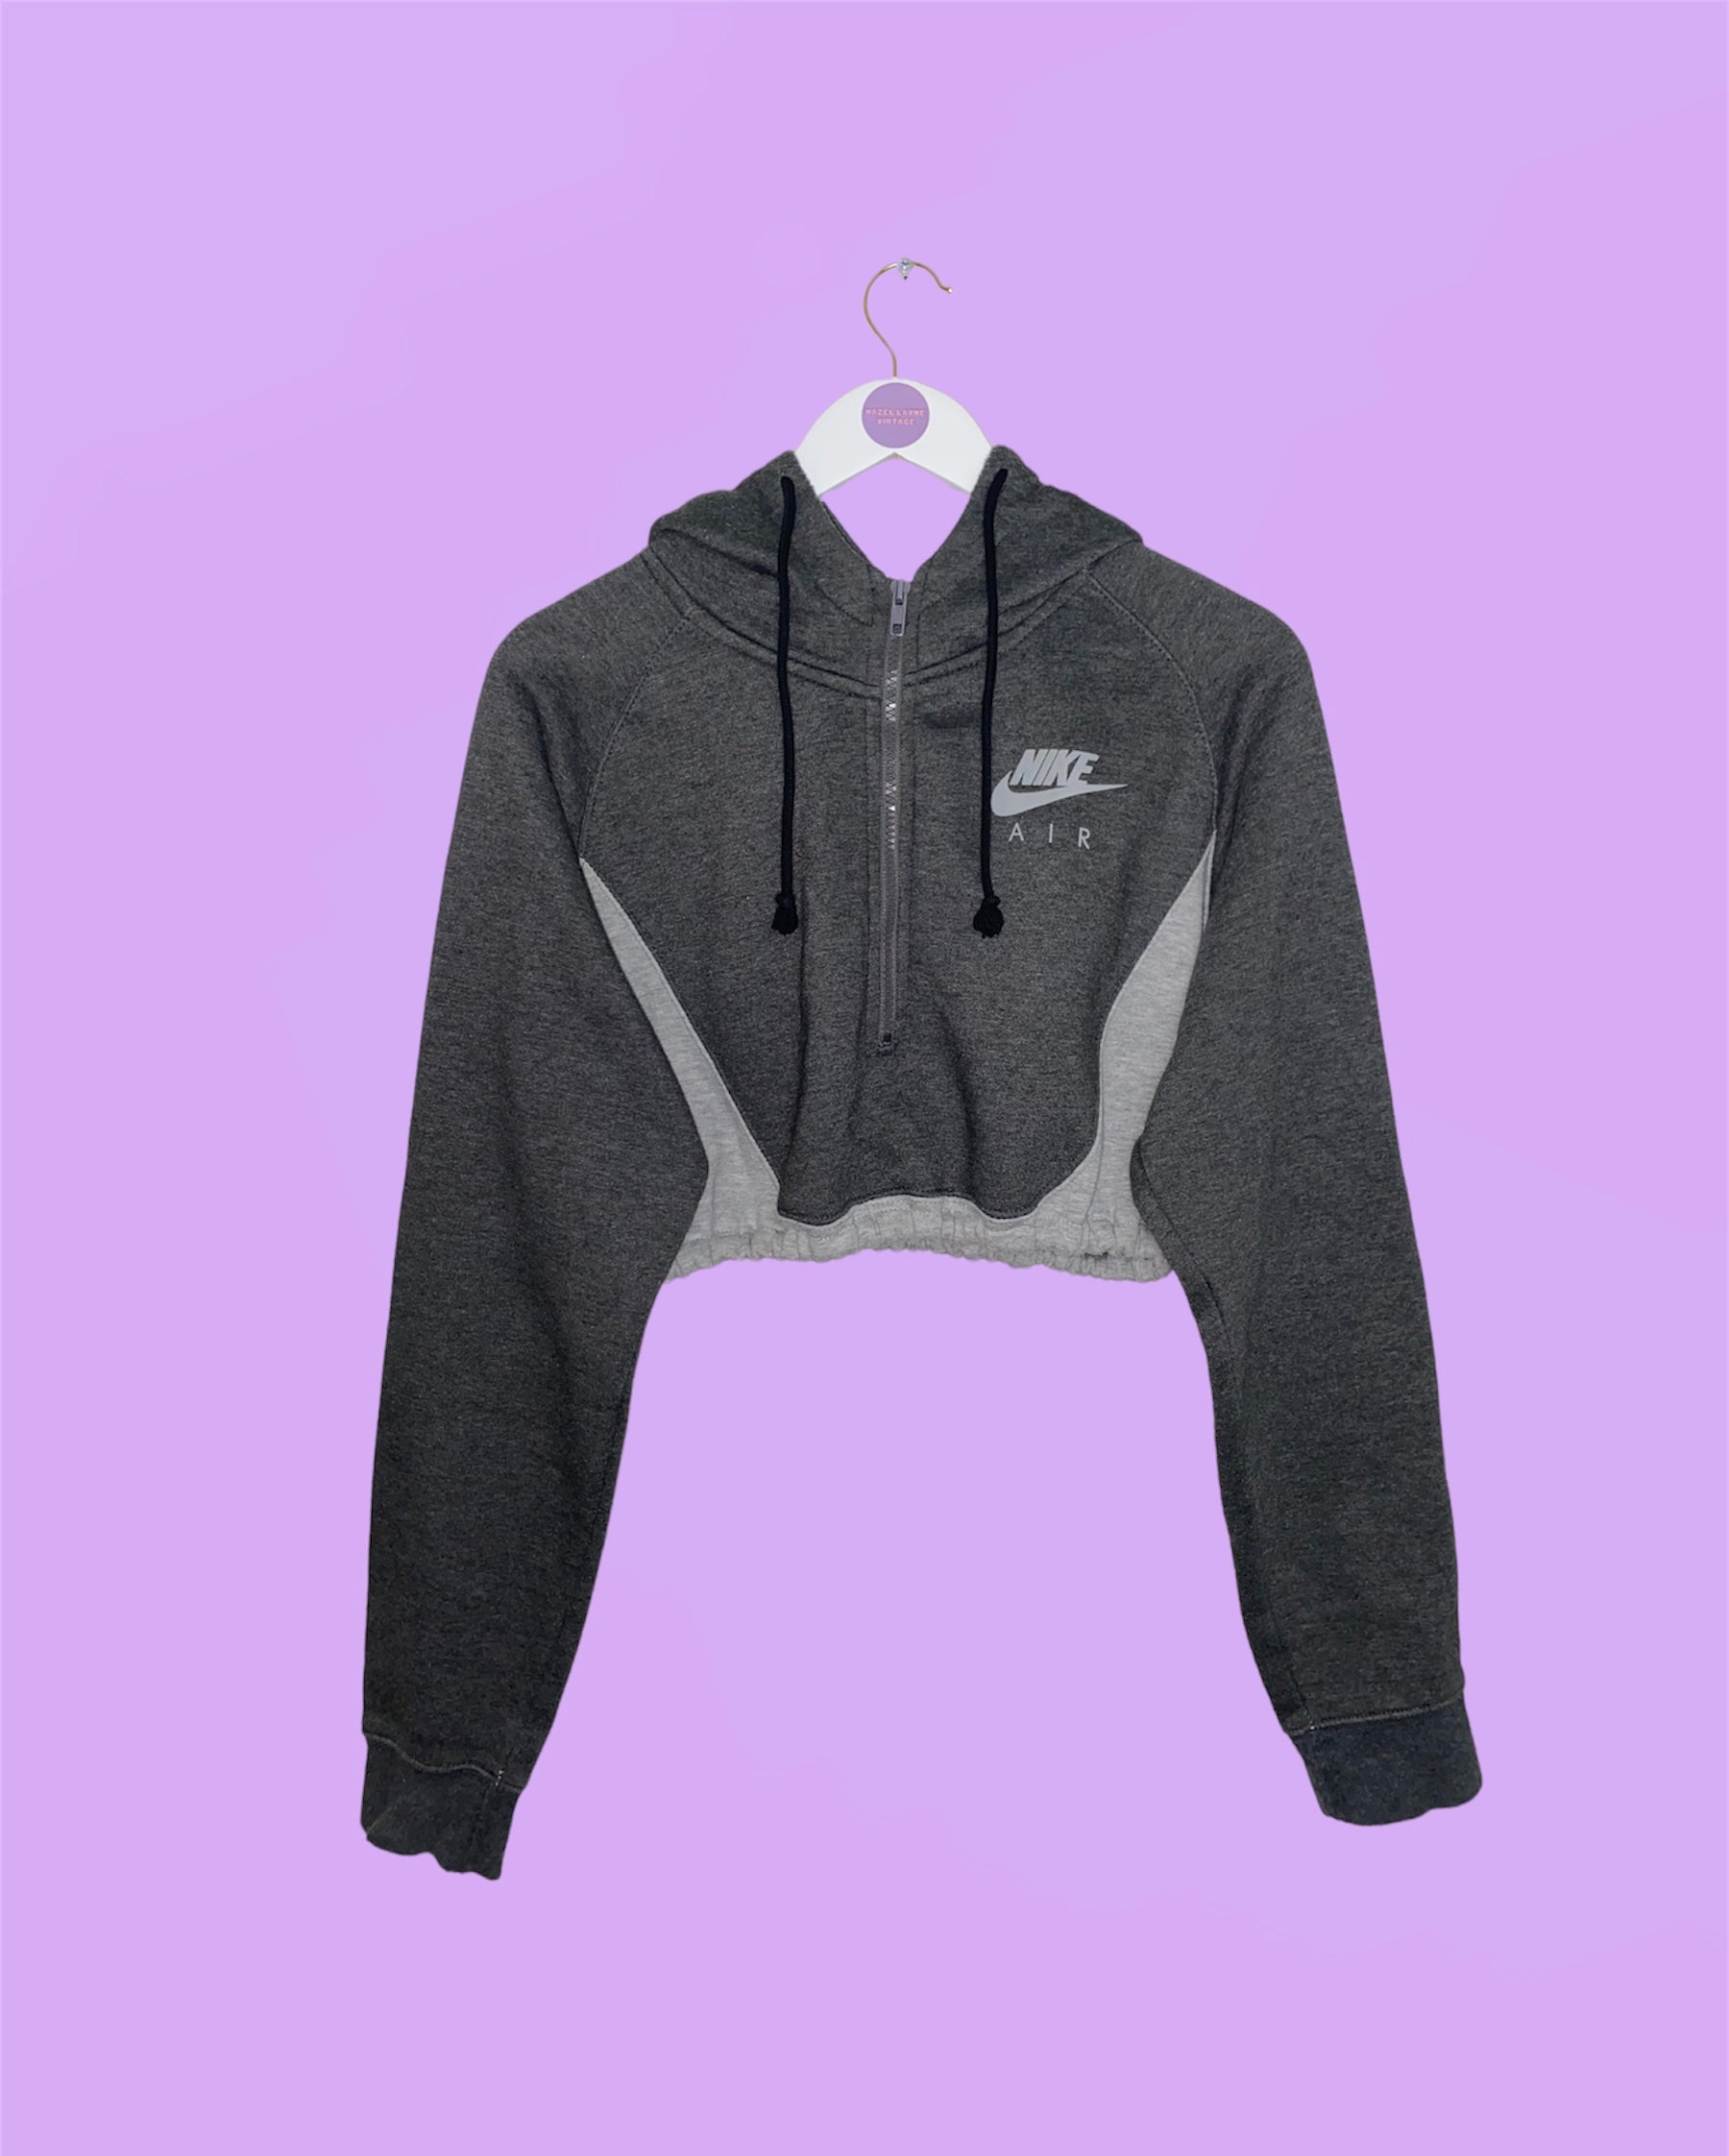 grey 1/4 zip cropped hoodie with nike air logo shown on a white clothes hanger on a lilac background